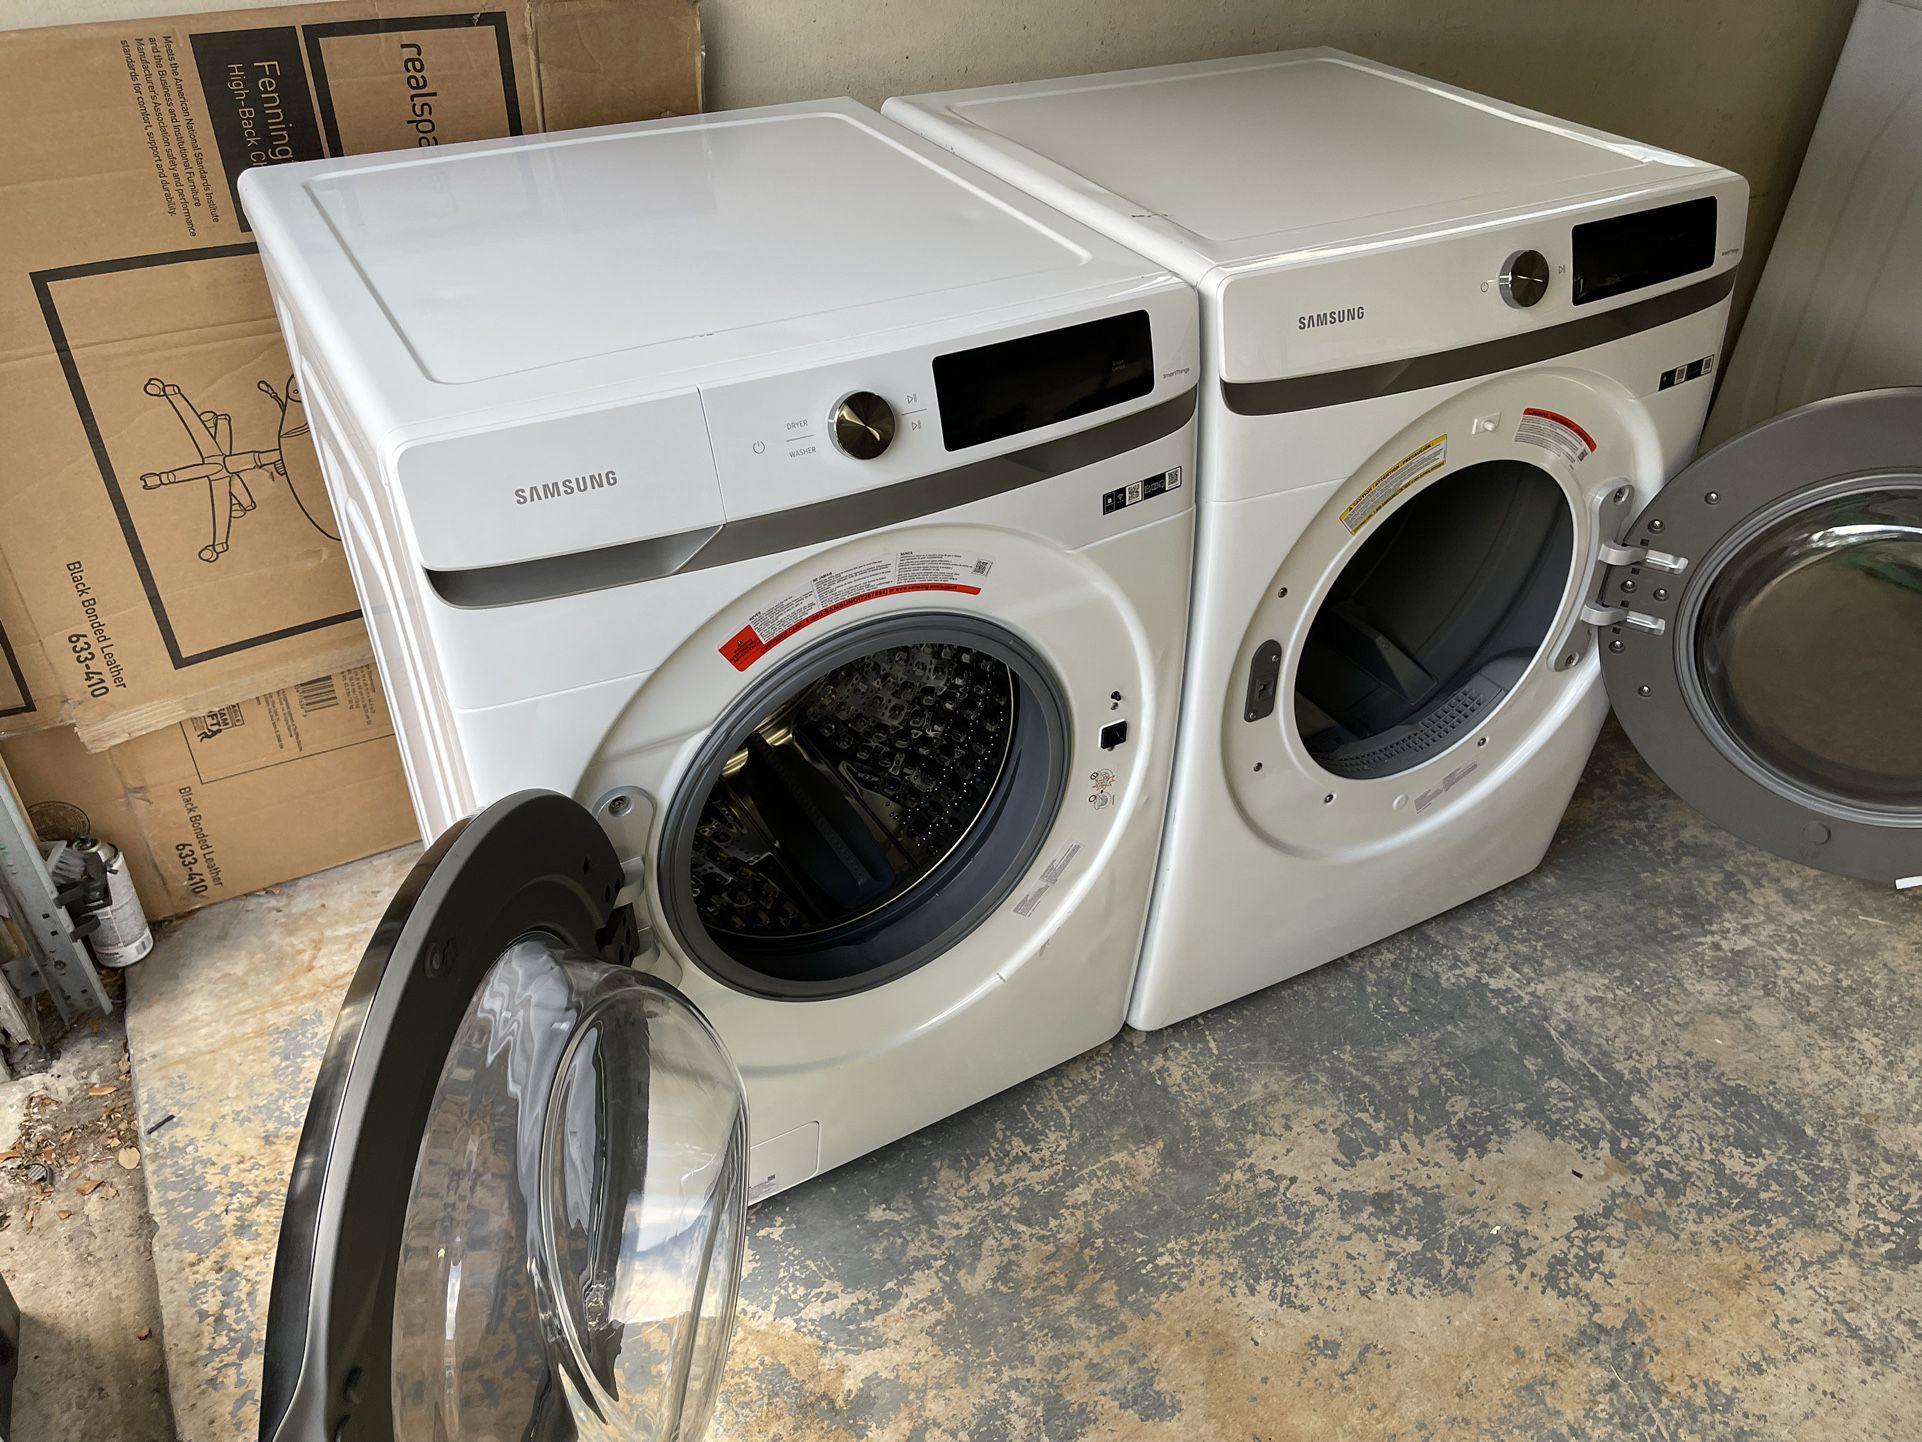 New Open Box Samsung Washer 4.5 Cu Ft And Dryer 7.5 Cu Ft In Good Working Conditions Scratch And Dents 